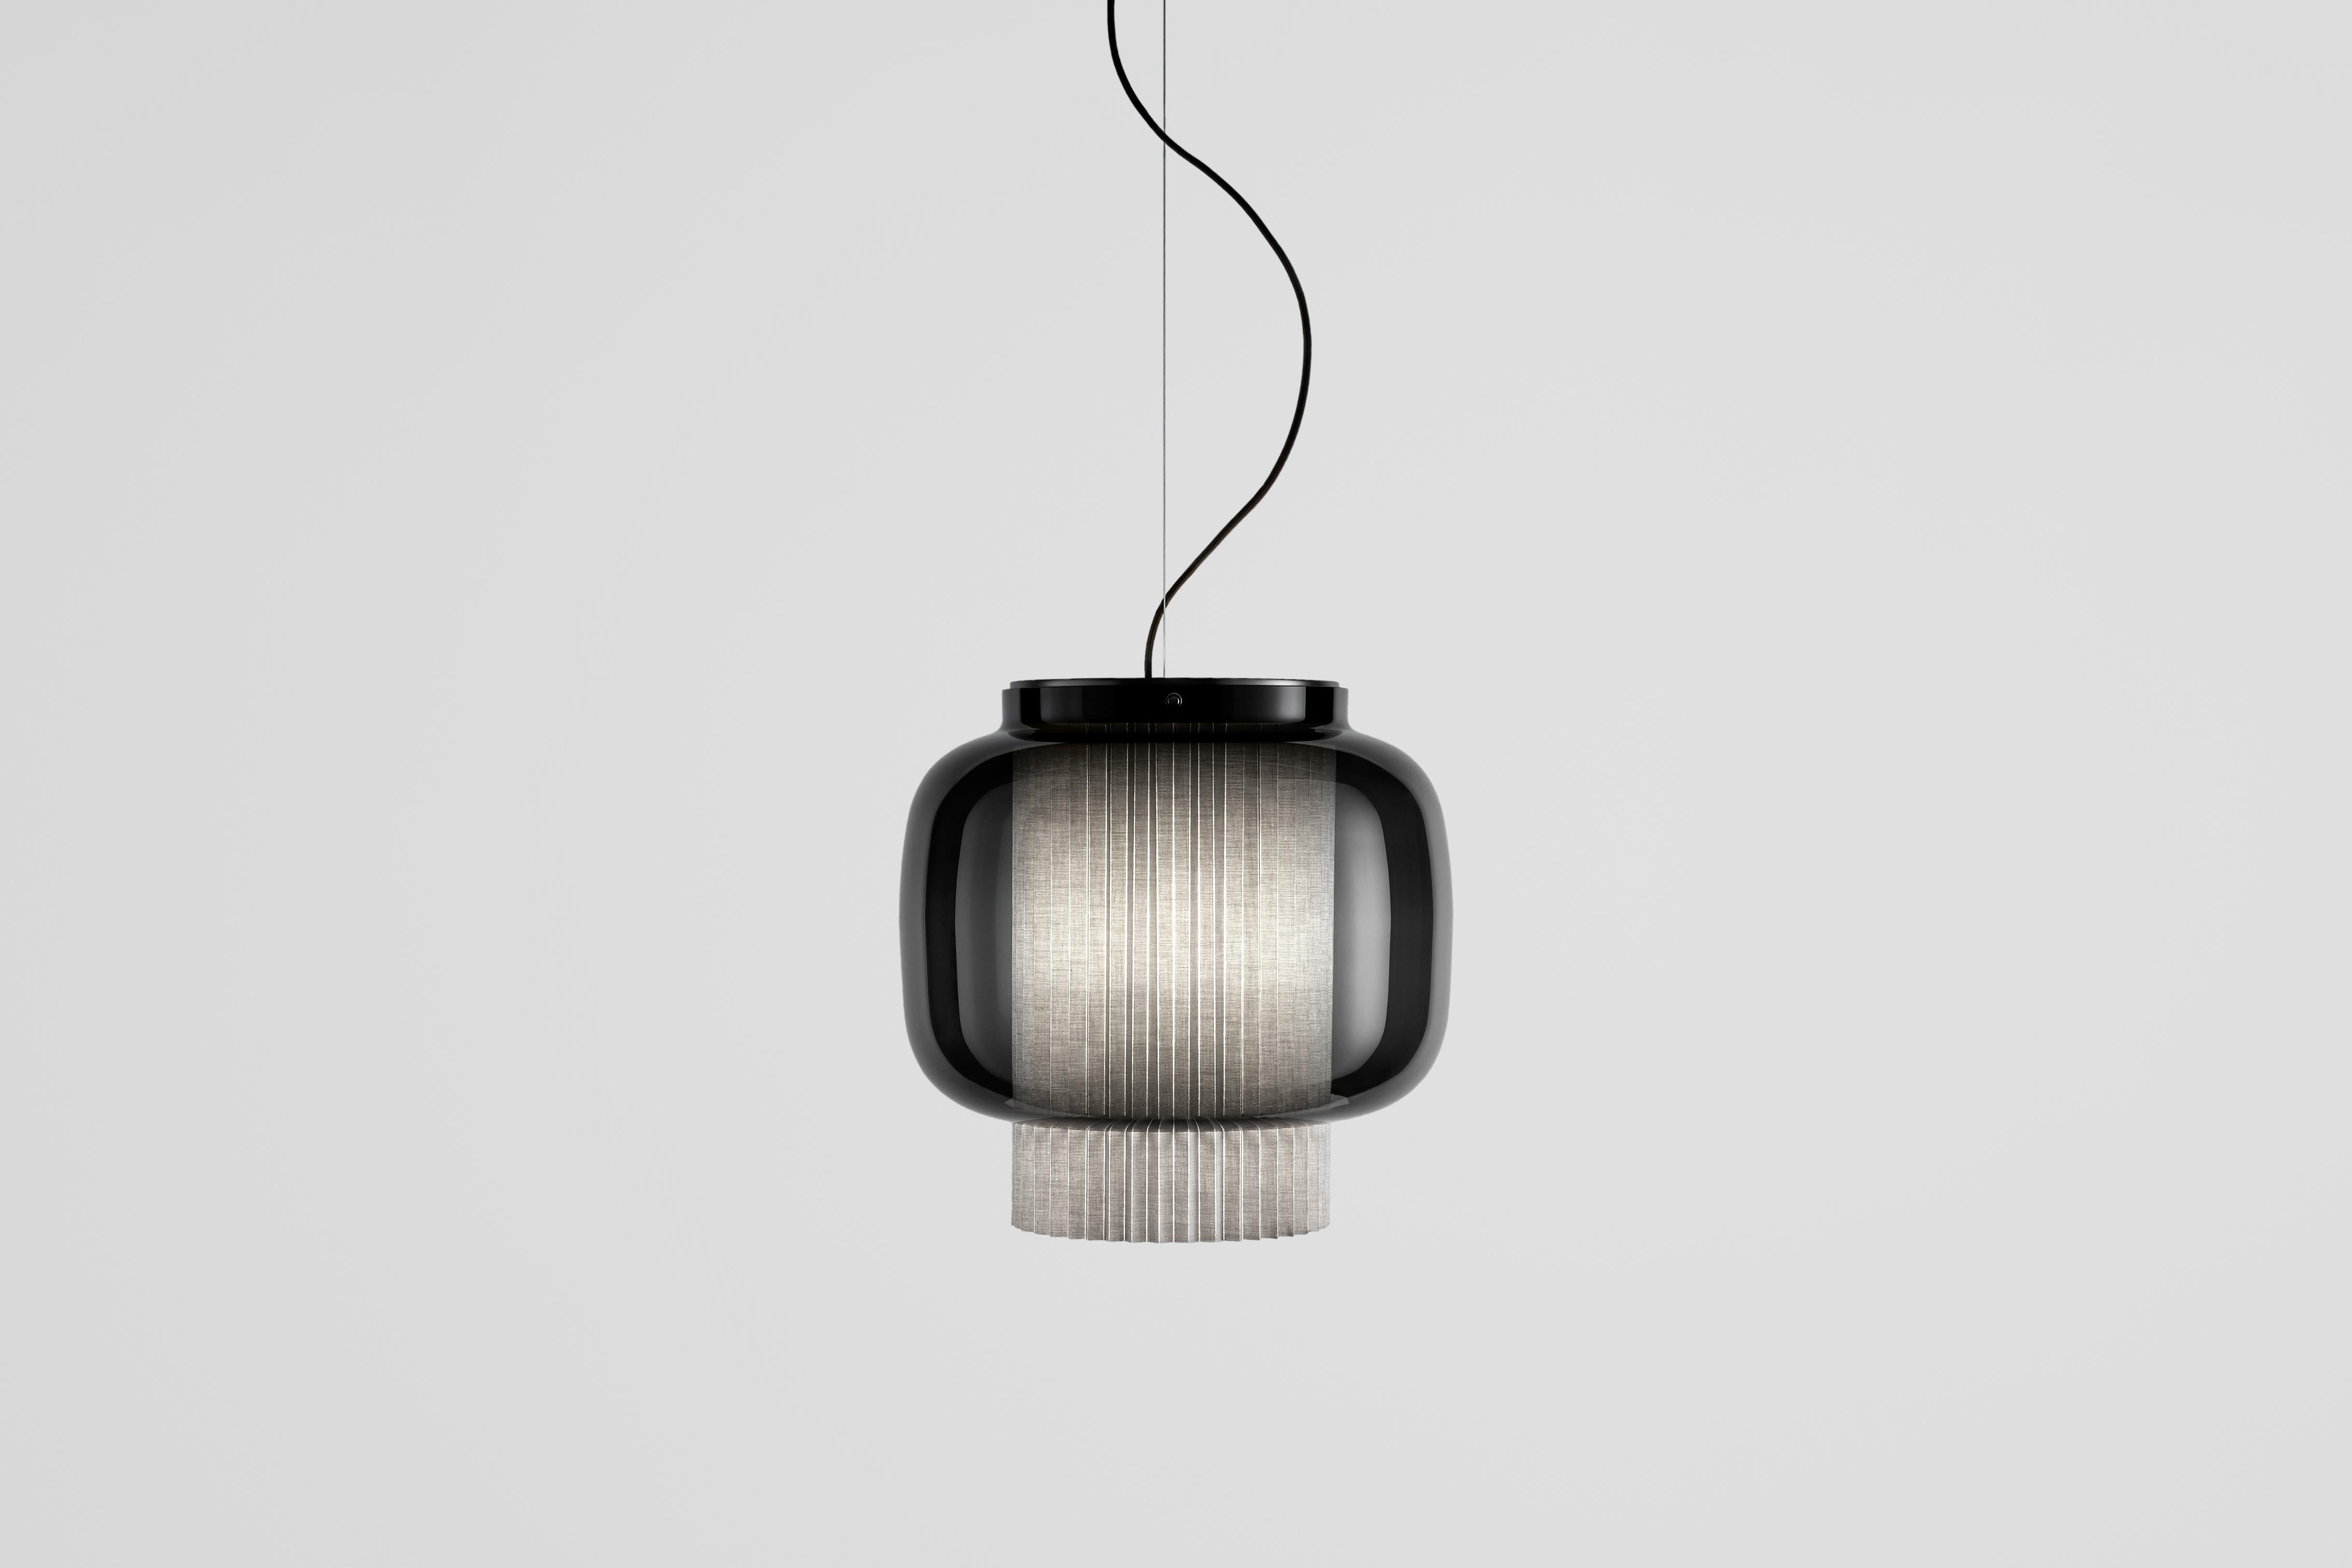 Manila T GR by Sebastian Herkner


An incredibly elegant combination of artisanal blown glass and a plissé textile diffuser. Its name comes from Spanish 